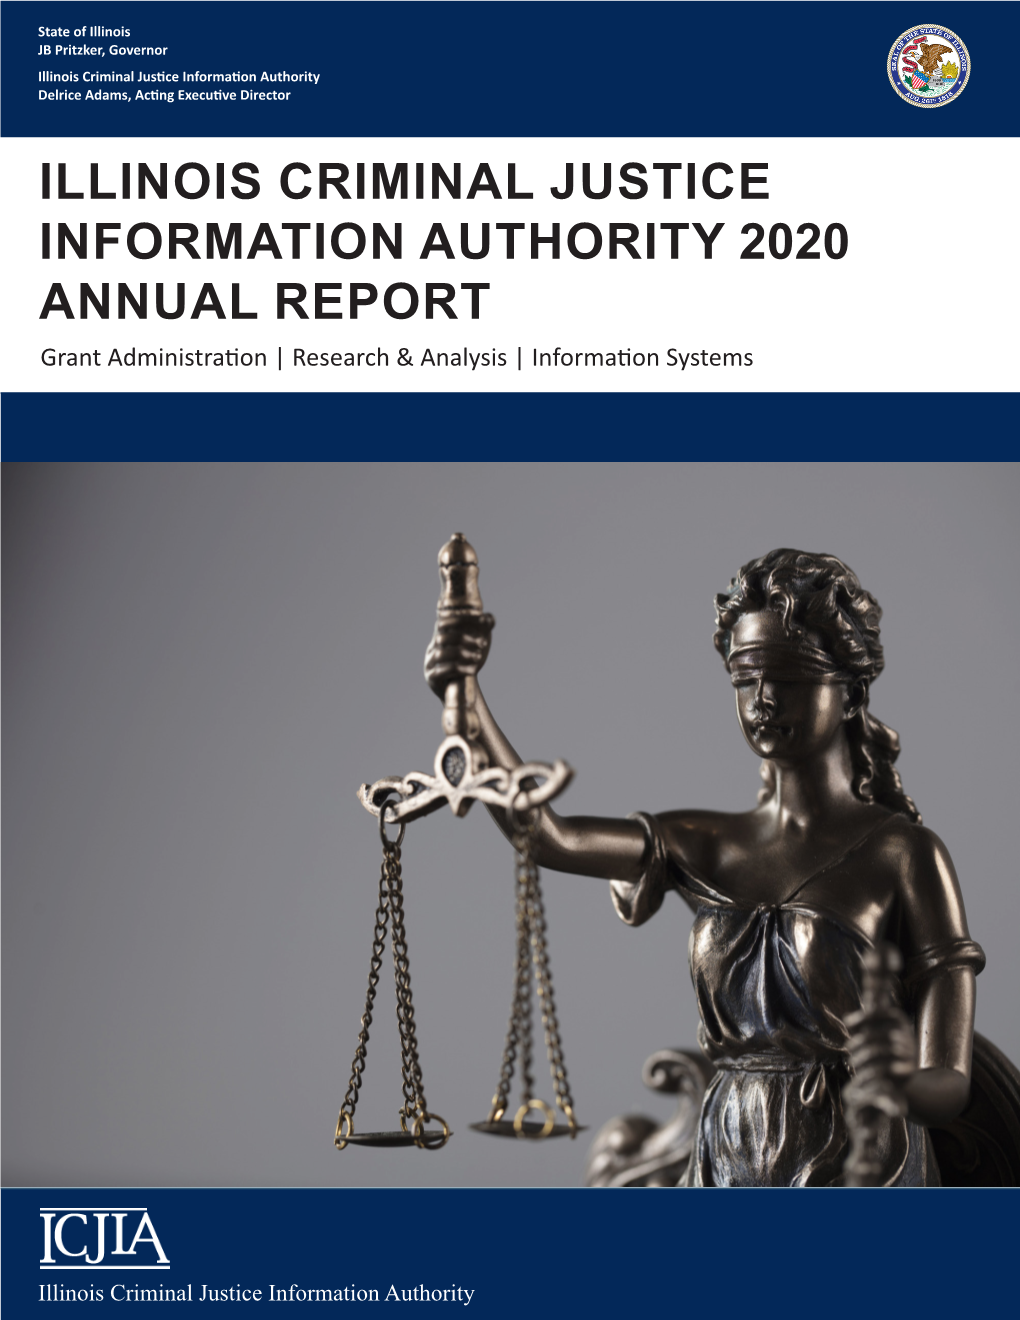 ILLINOIS CRIMINAL JUSTICE INFORMATION AUTHORITY 2020 ANNUAL REPORT Grant Administration | Research & Analysis | Information Systems